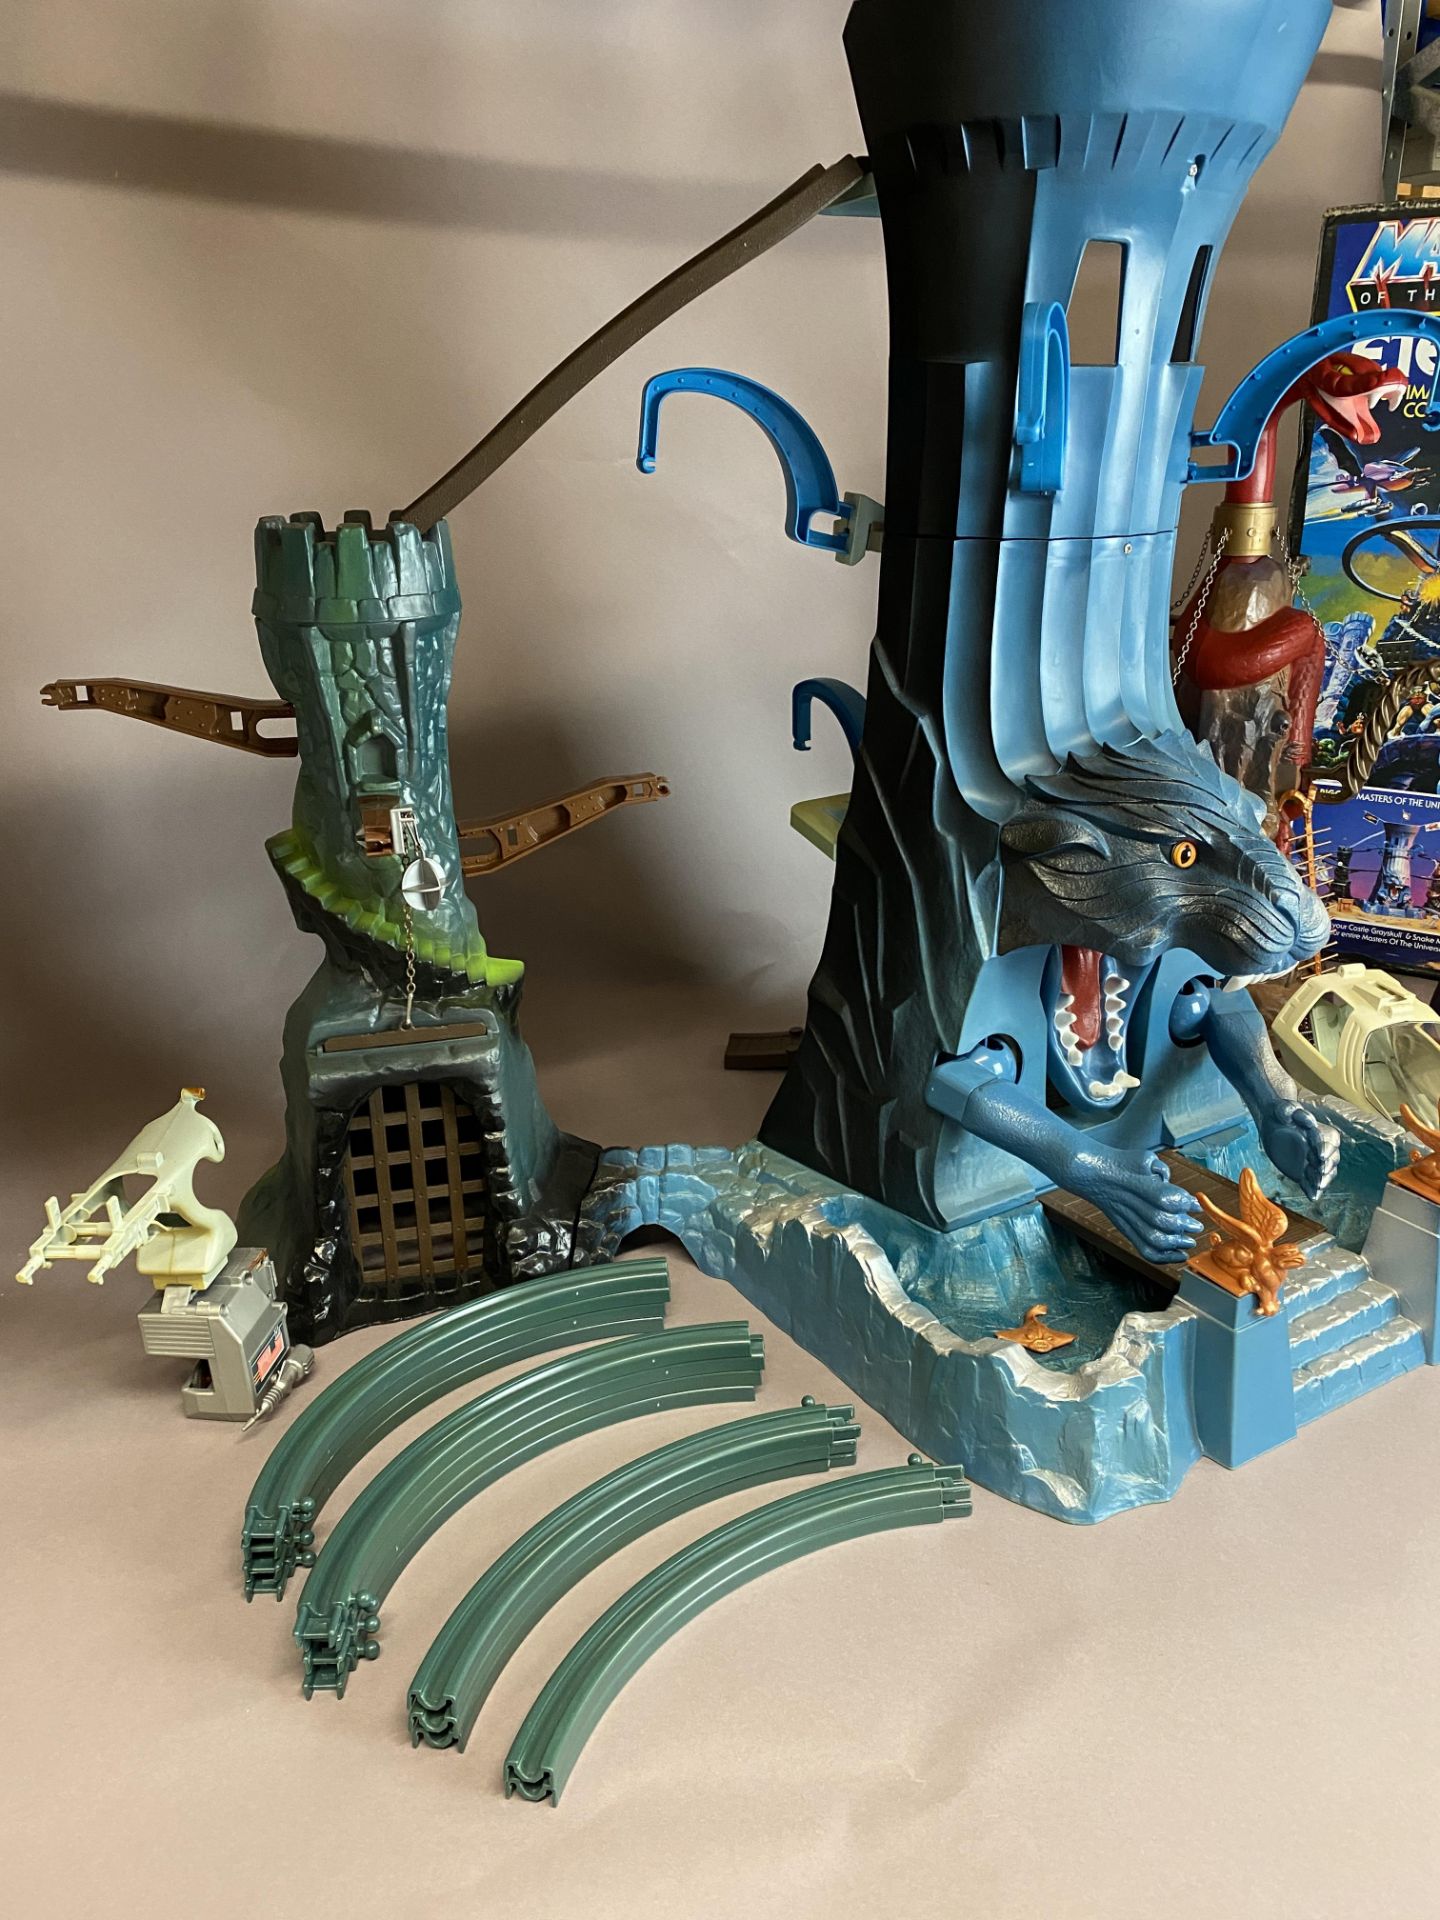 ETERNIA - Vintage Masters of the Universe Playset and Original Box (MOTU) - Appears to be complete - Image 86 of 125